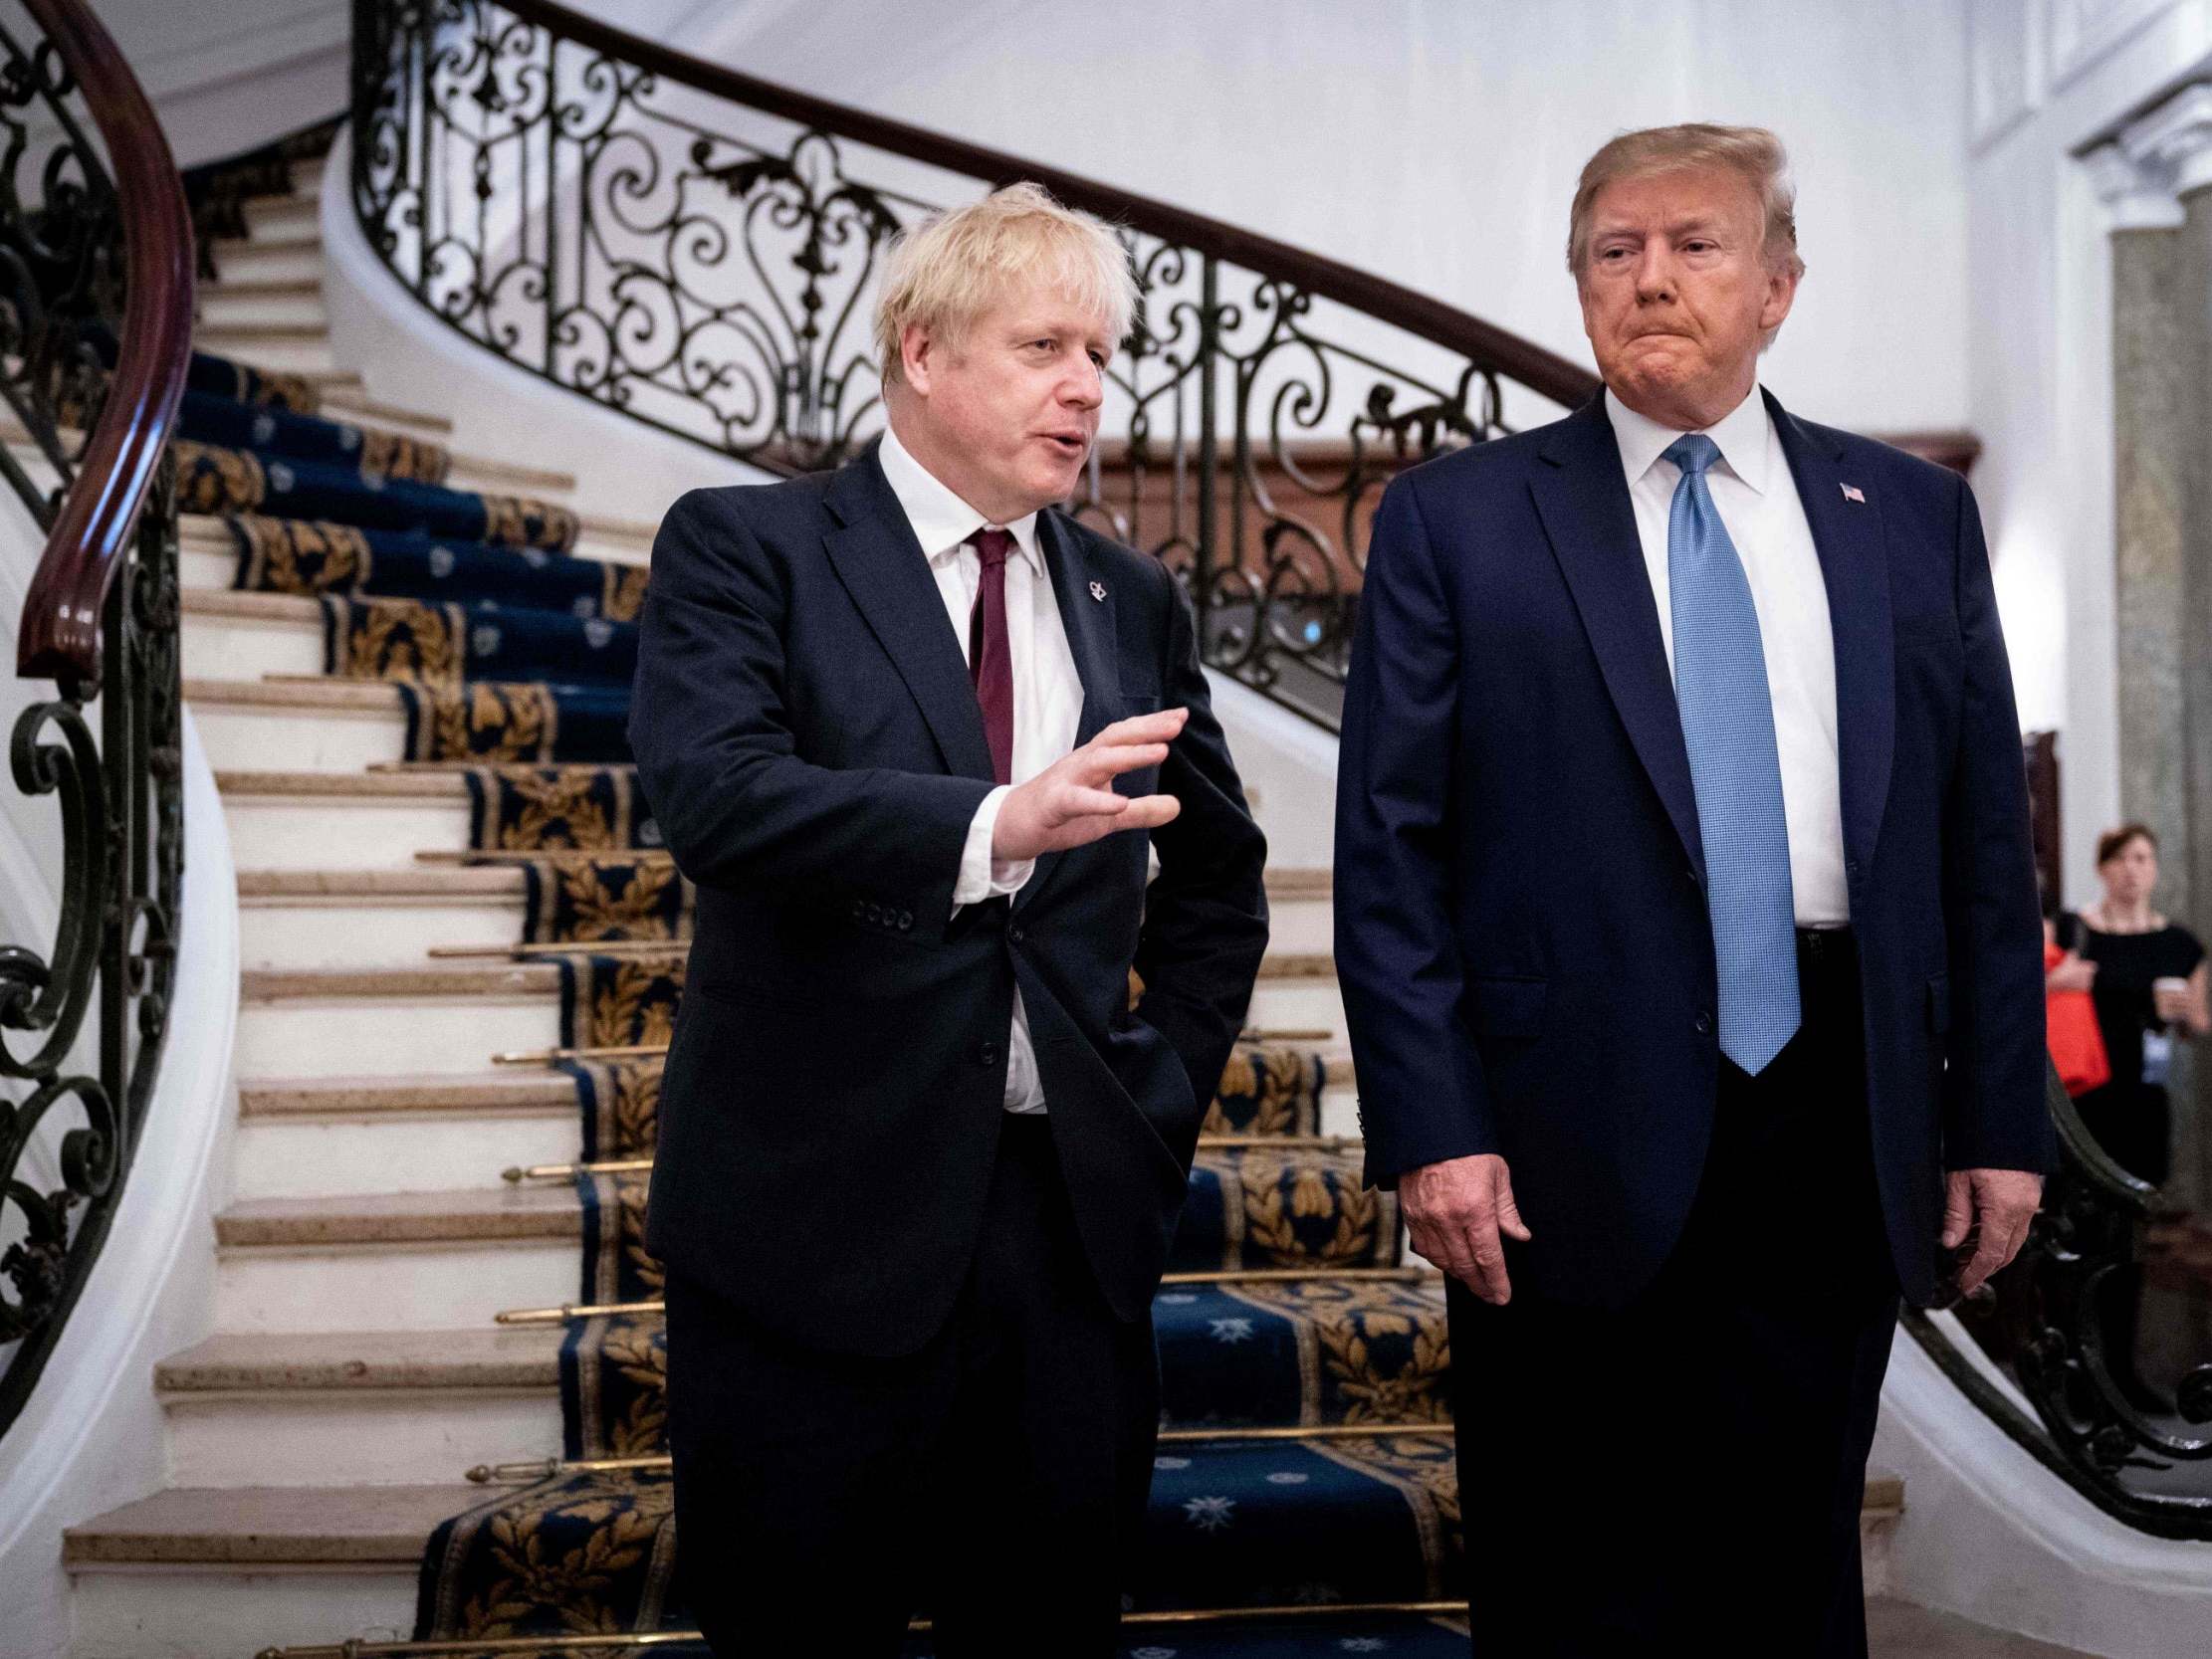 Boris Johnson and Donald Trump at the G7 Summit in Biarritz, France, August 2019